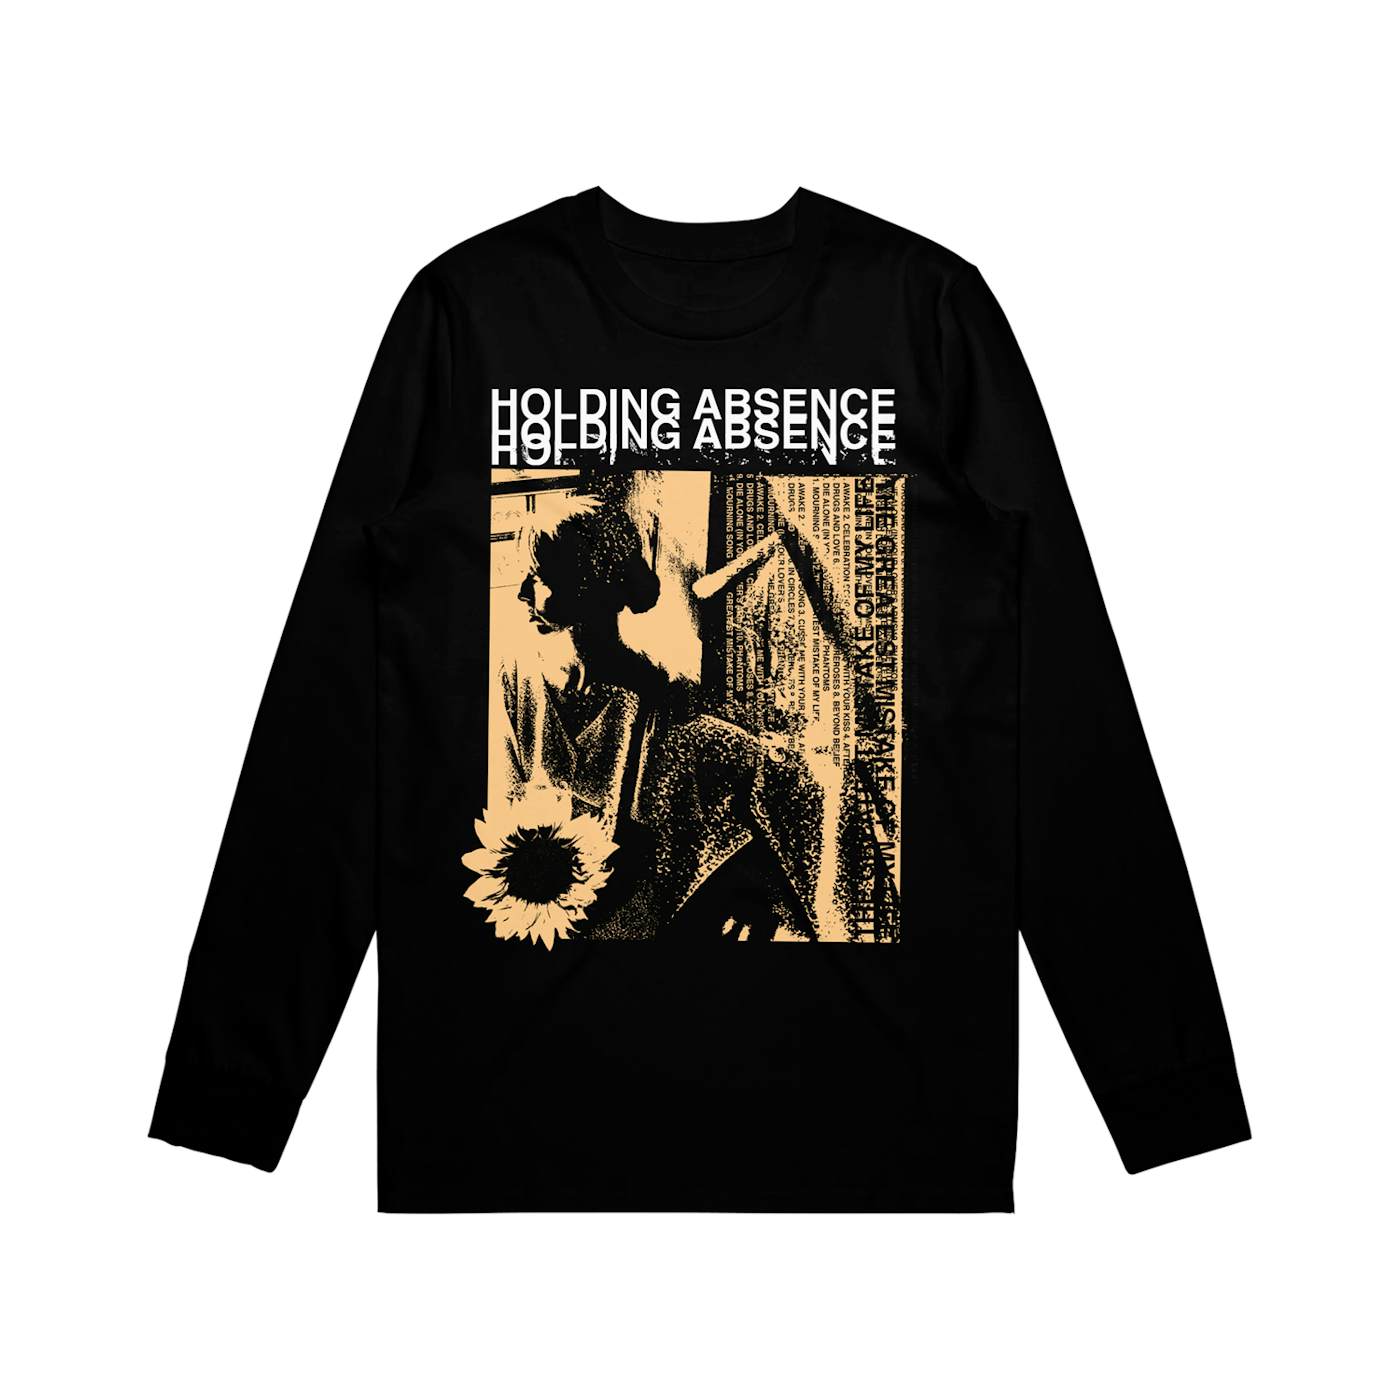 Holding Absence - Tracklist Long Sleeve